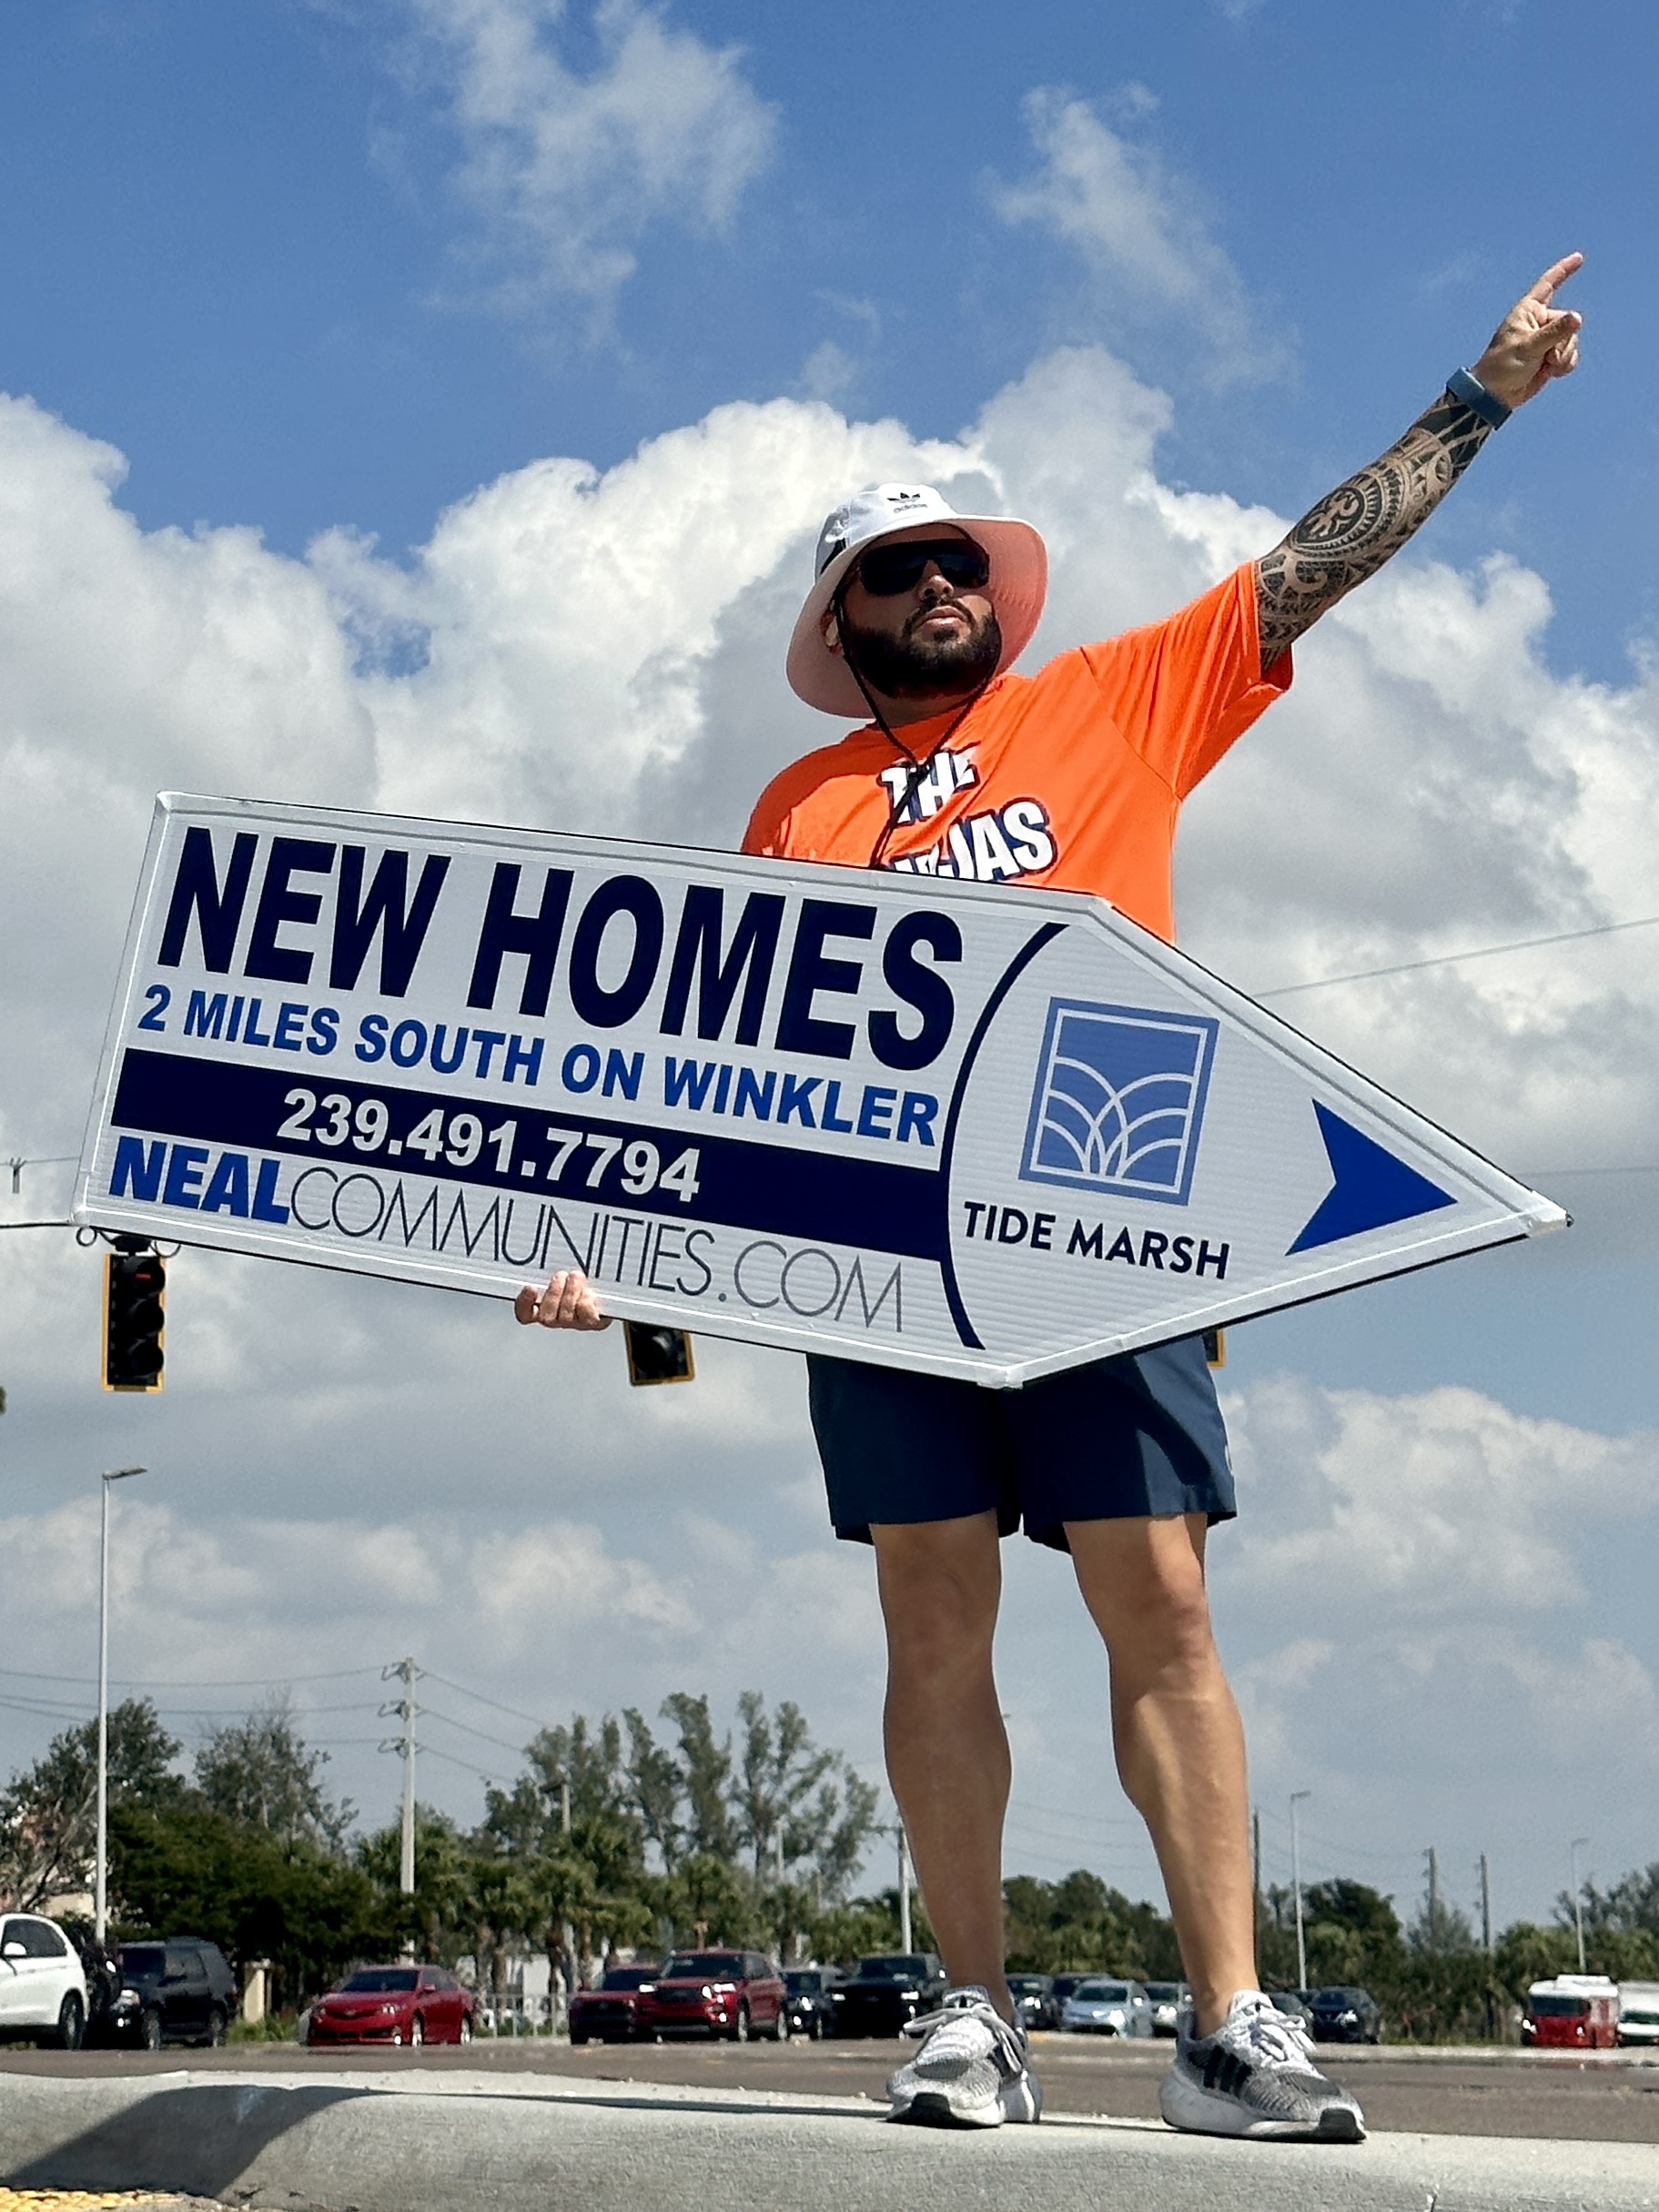 Sign Spinners in Miami, Florida | Fort Lauderdale | Tampa | Naples | Fort Myers | Orlando | Lake wood Ranch | Sarasota